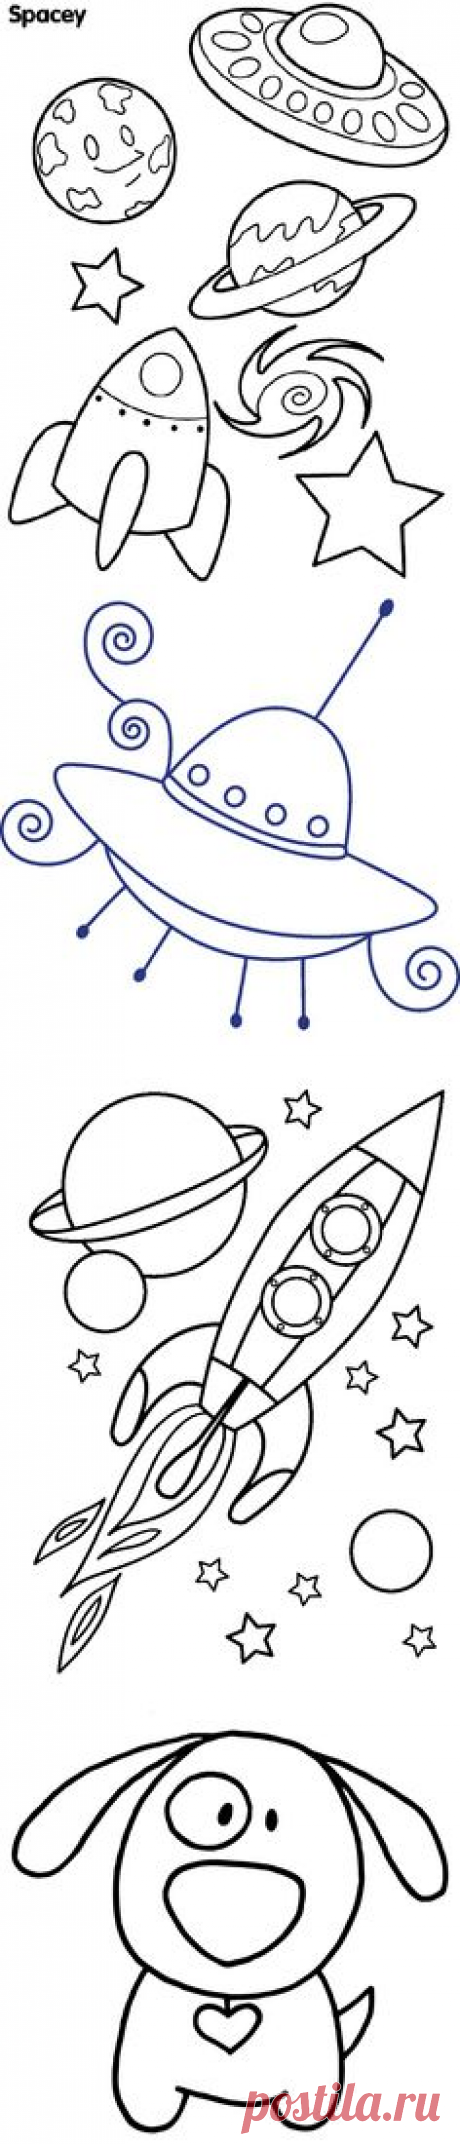 (161) Digital Stamp - Space Rocket Spaceship - Printable Line Art for Card & Craft Supply. Digital image. Clipart Commercial Use